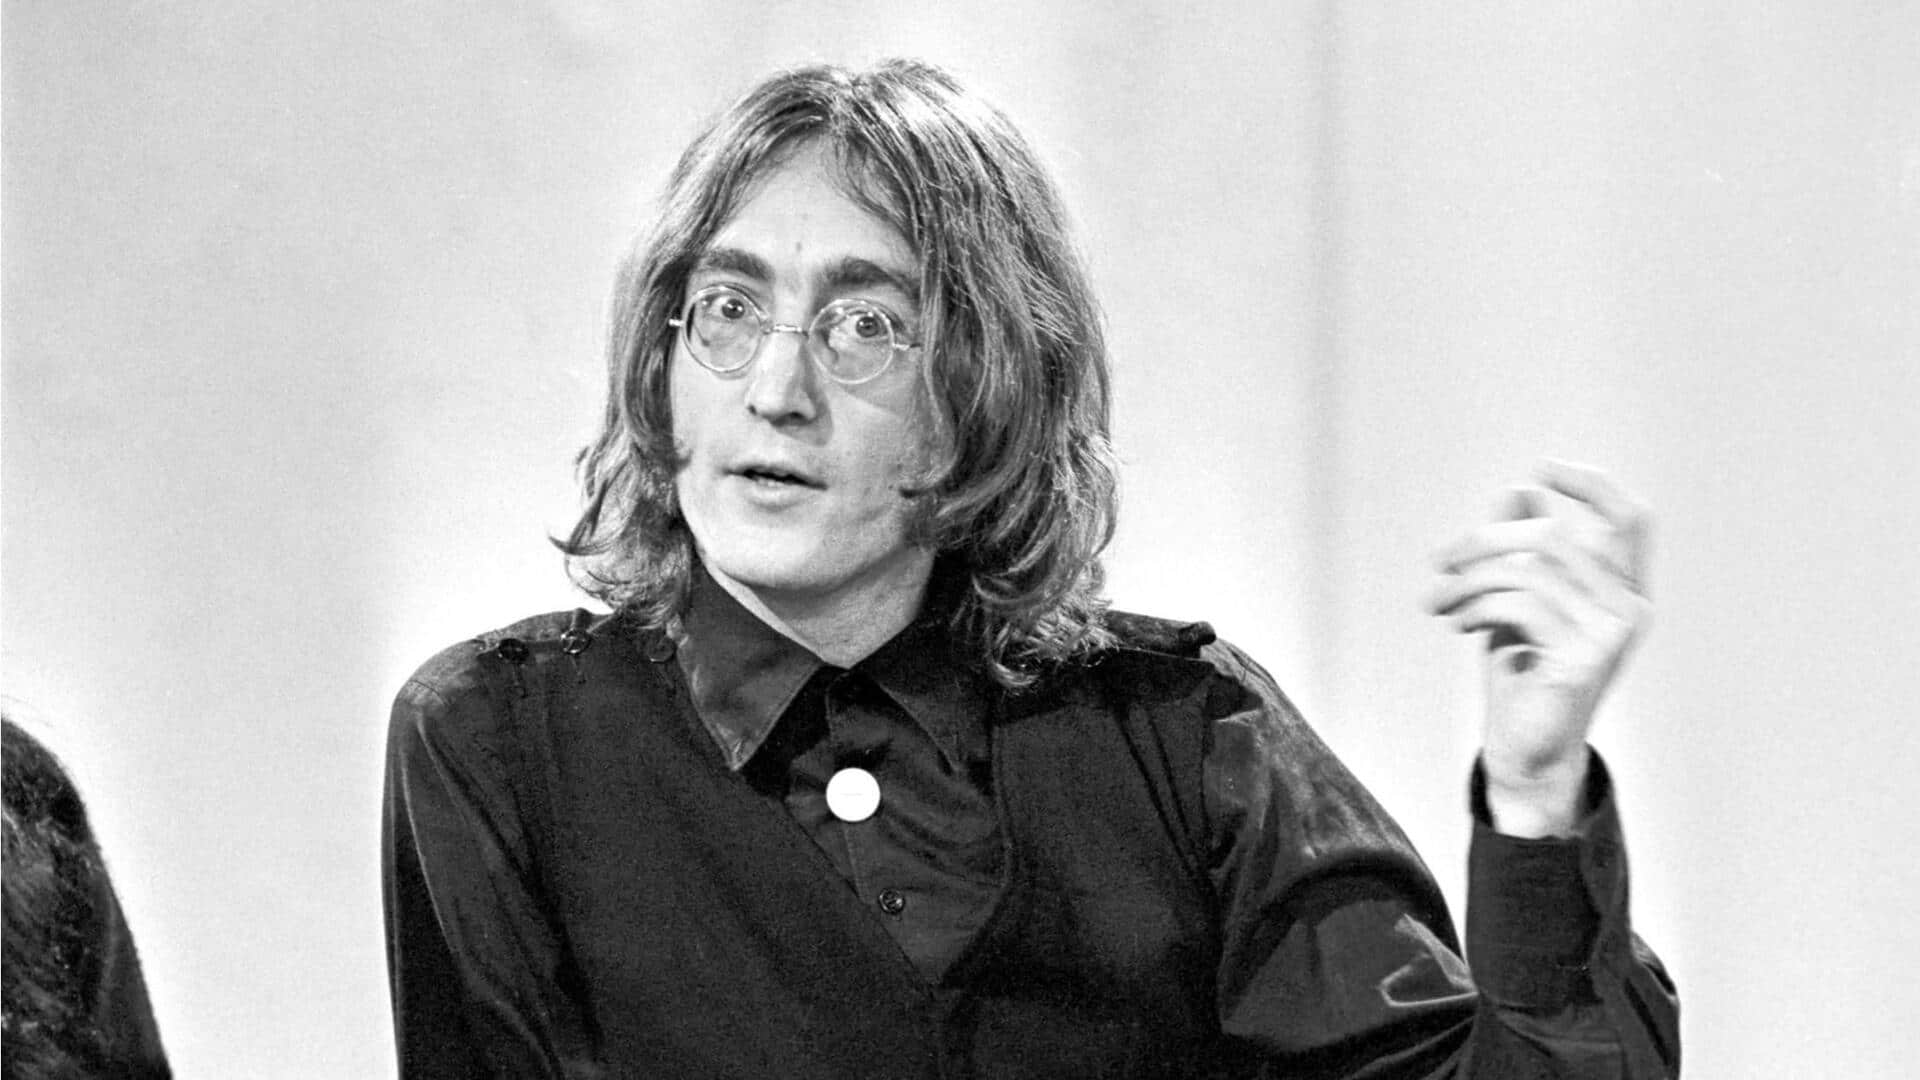 'John Lennon: Murder Without a Trial' premiere date, summary out